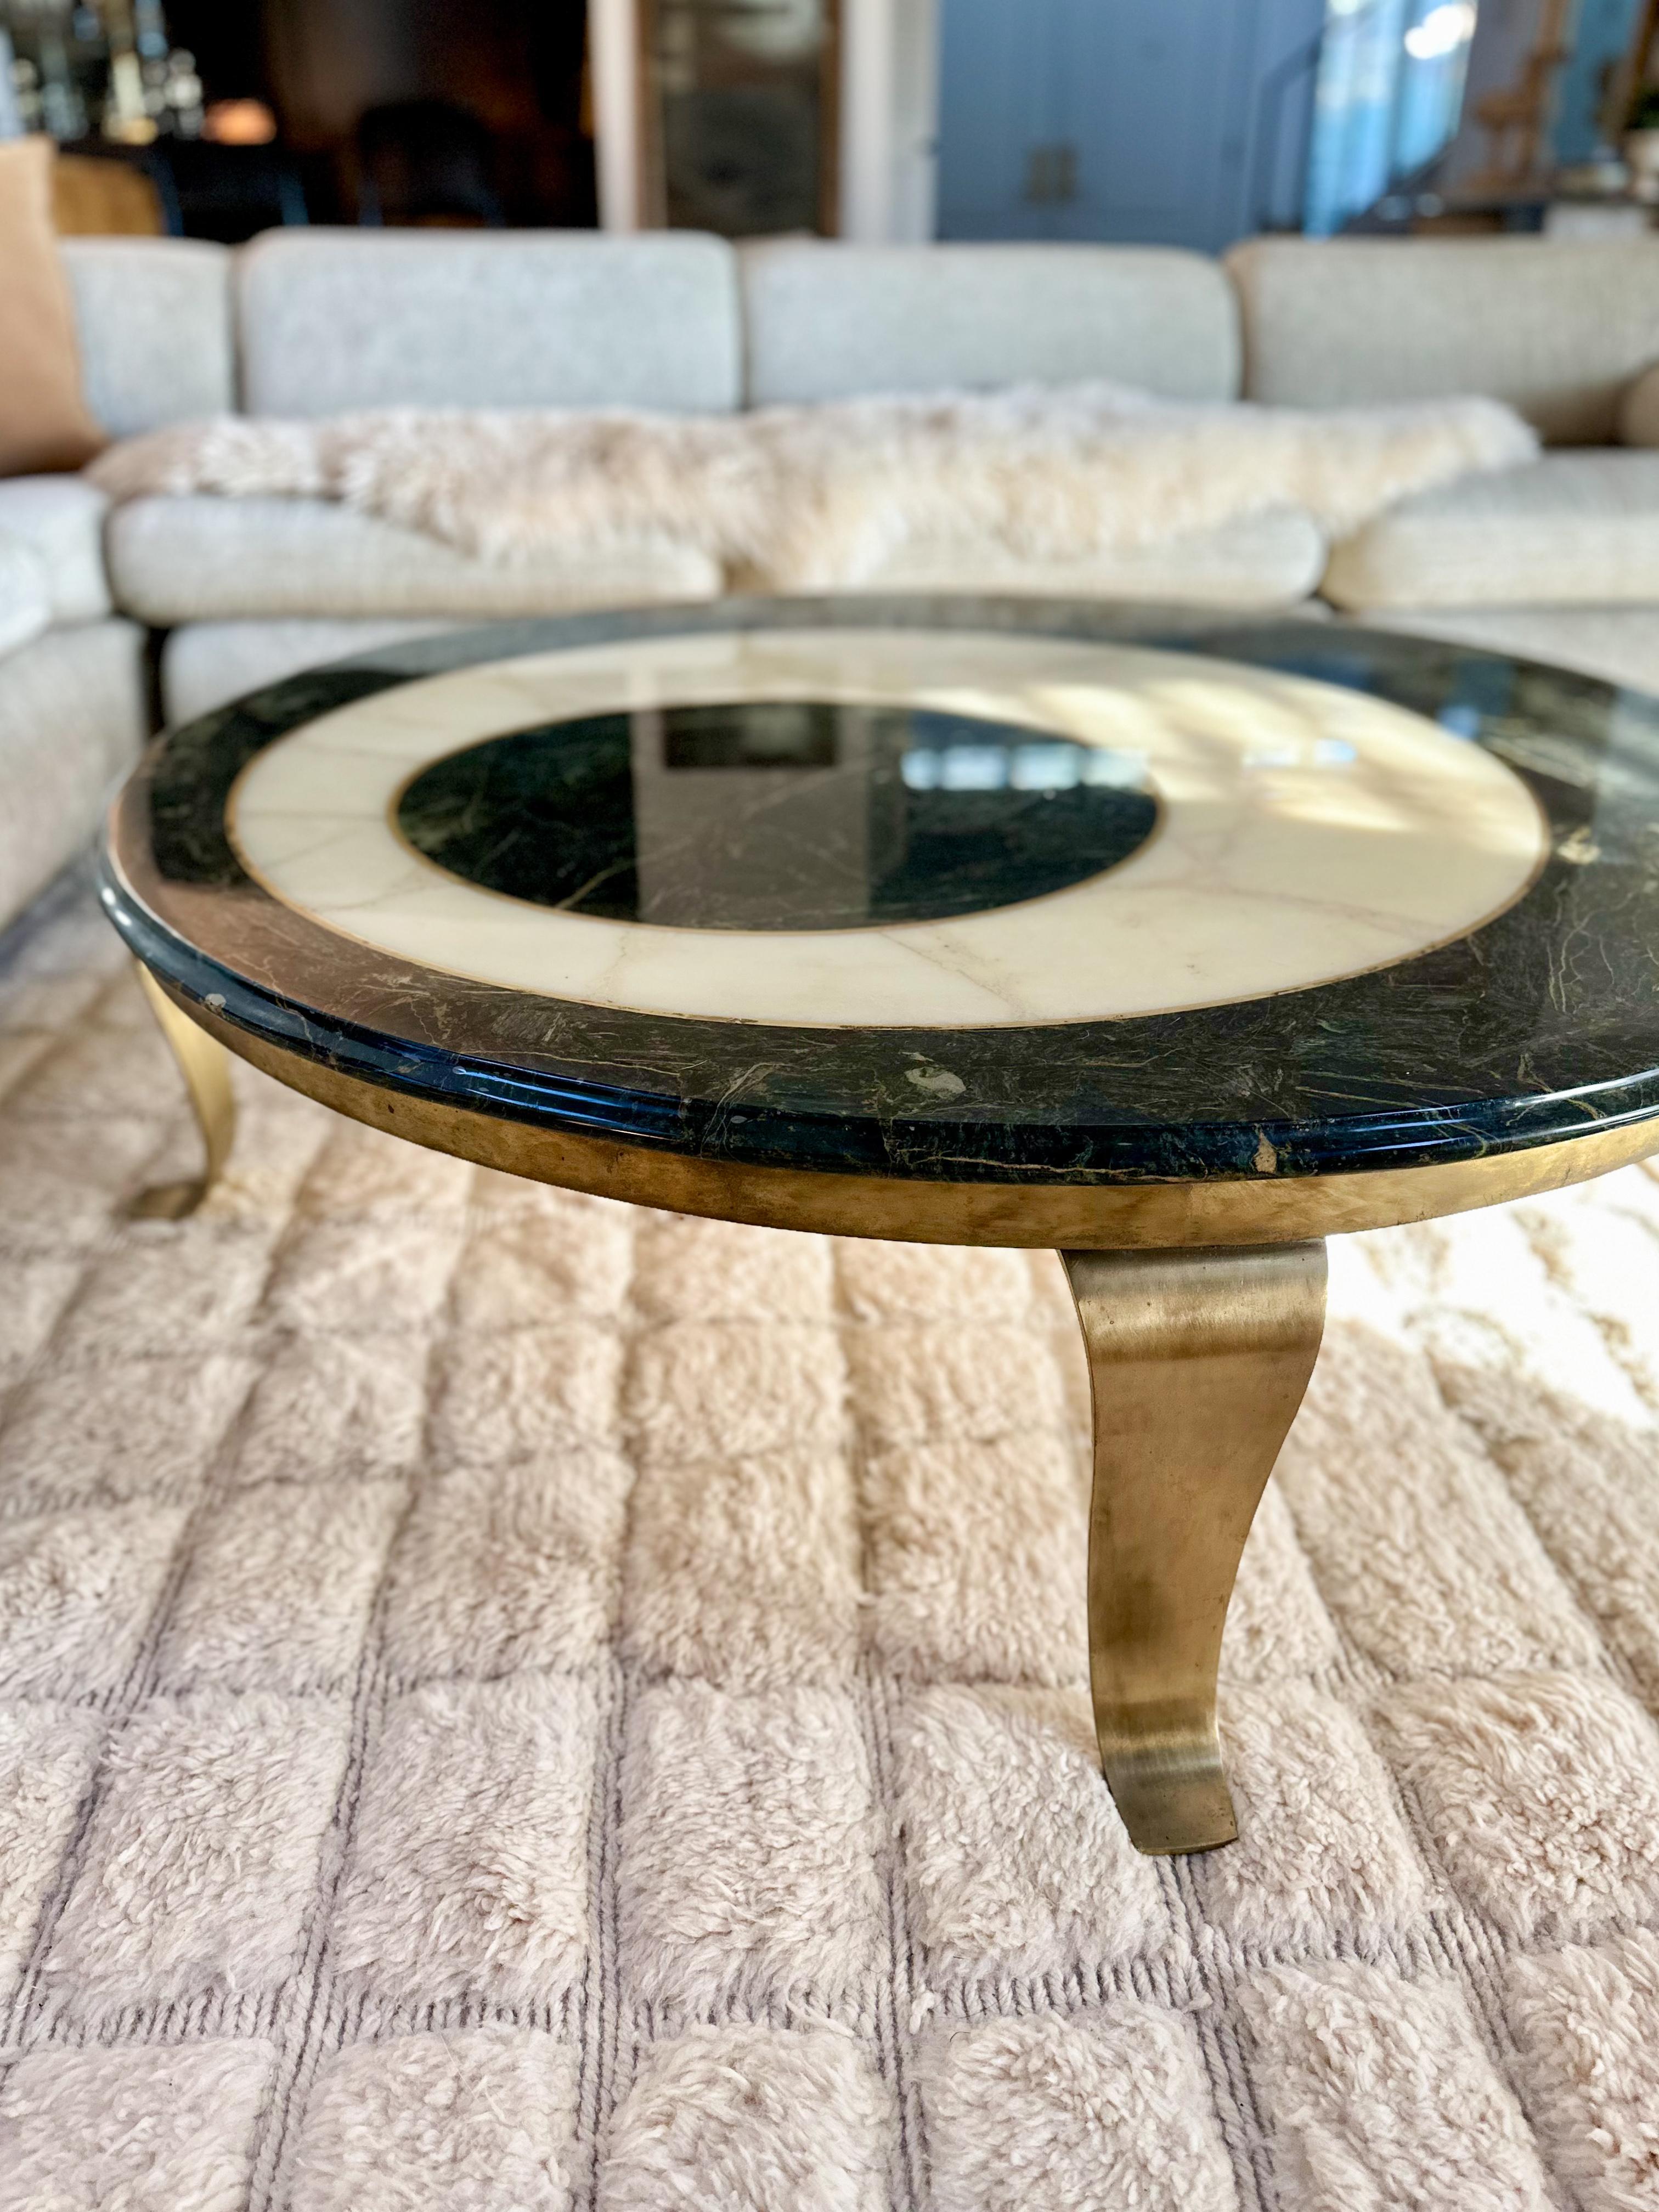 1960s Green and Cream Onyx Coffee Table by Arturo Pani for Muller of Mexico 1